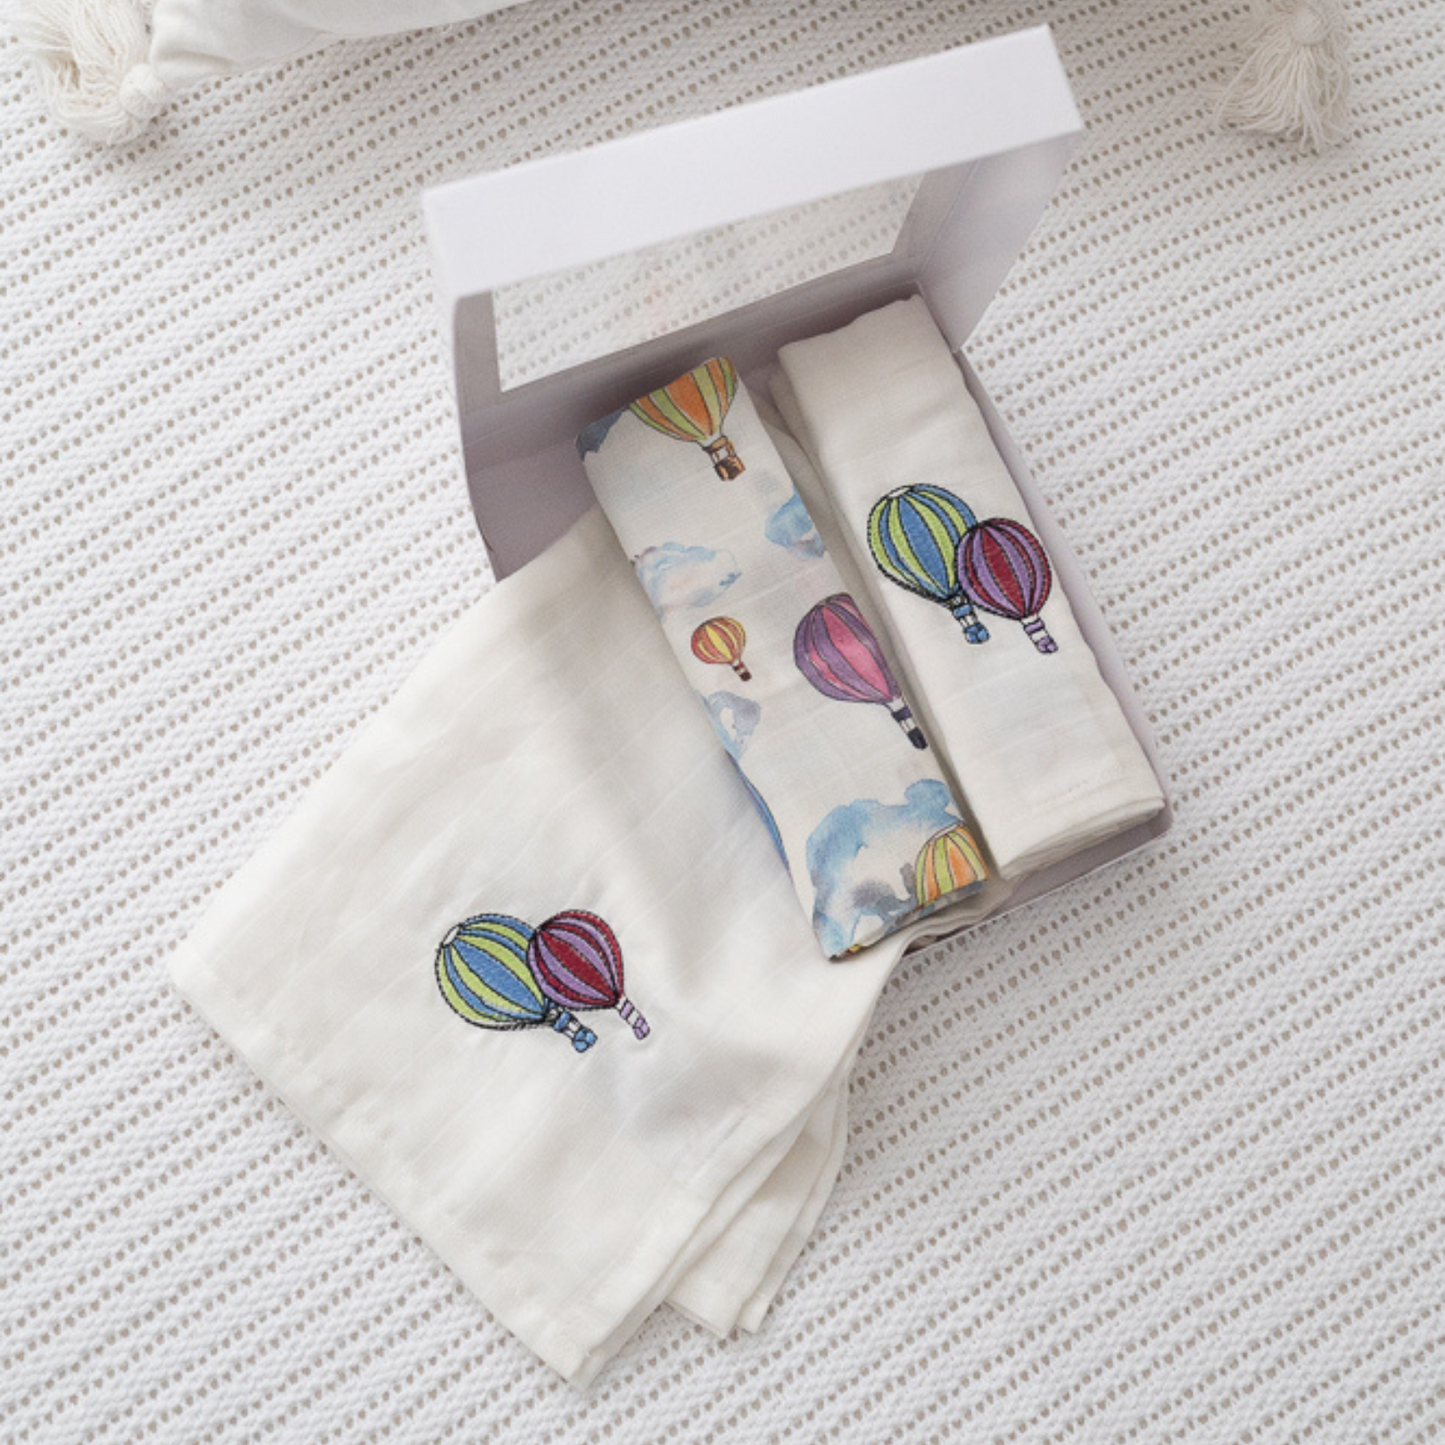 Load image into Gallery viewer, Balloon Festival Muslin Swaddle (Set of 3)
